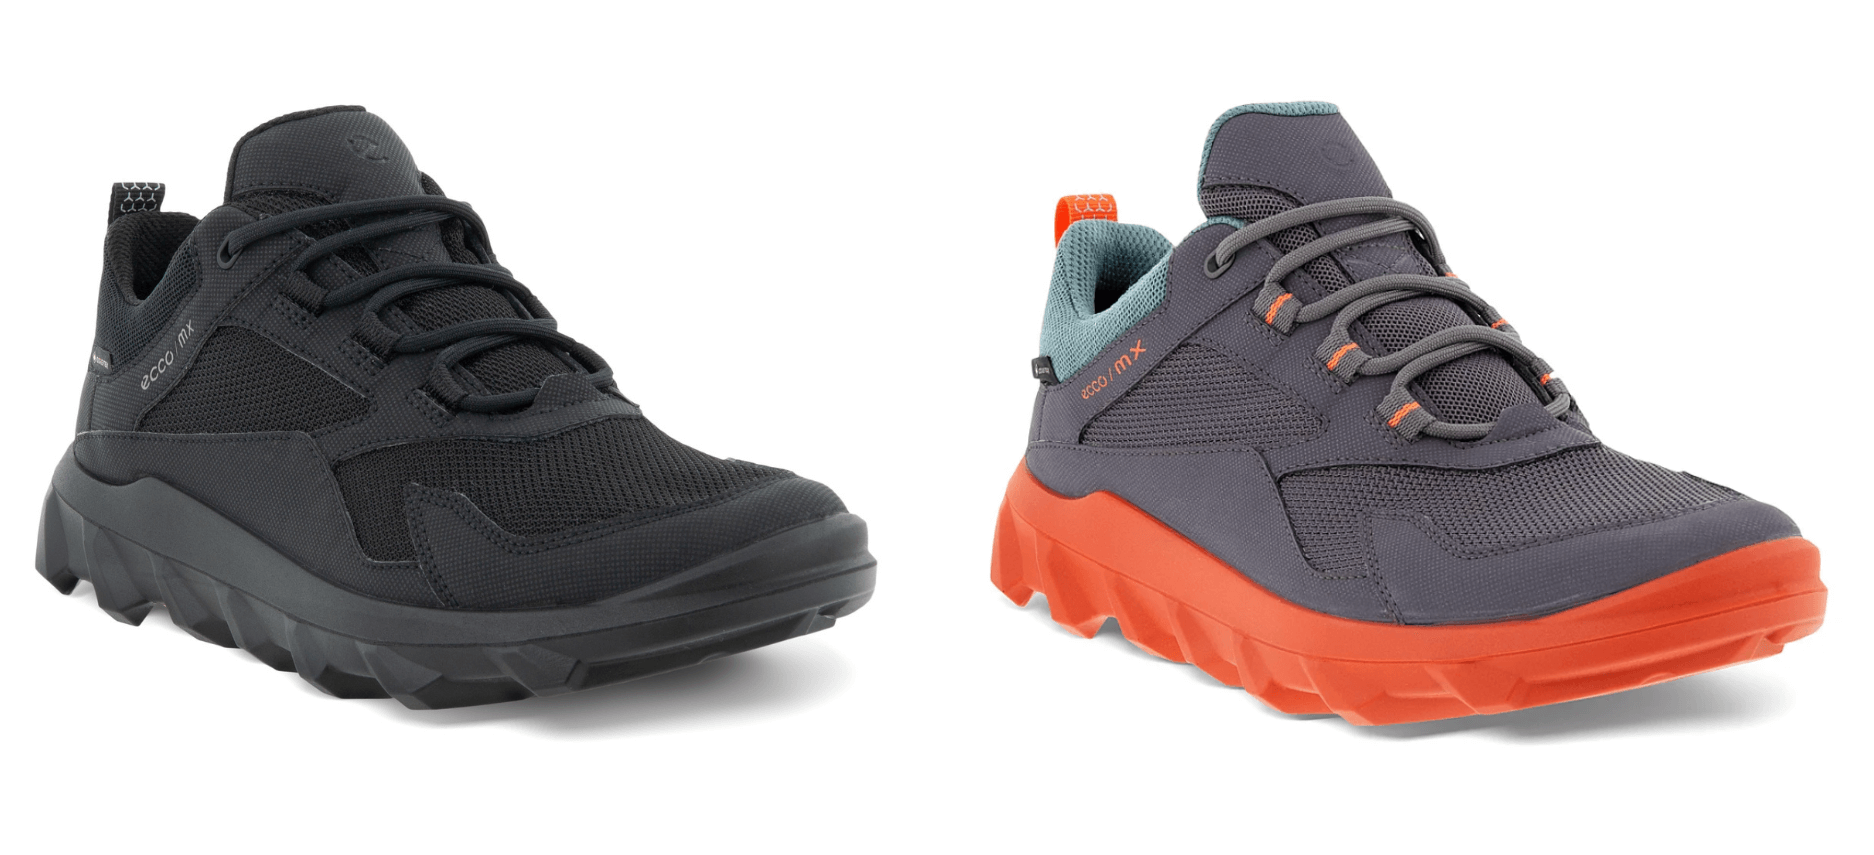 Win pair of waterproof ECCO MX shoes worth - Wired Adventure